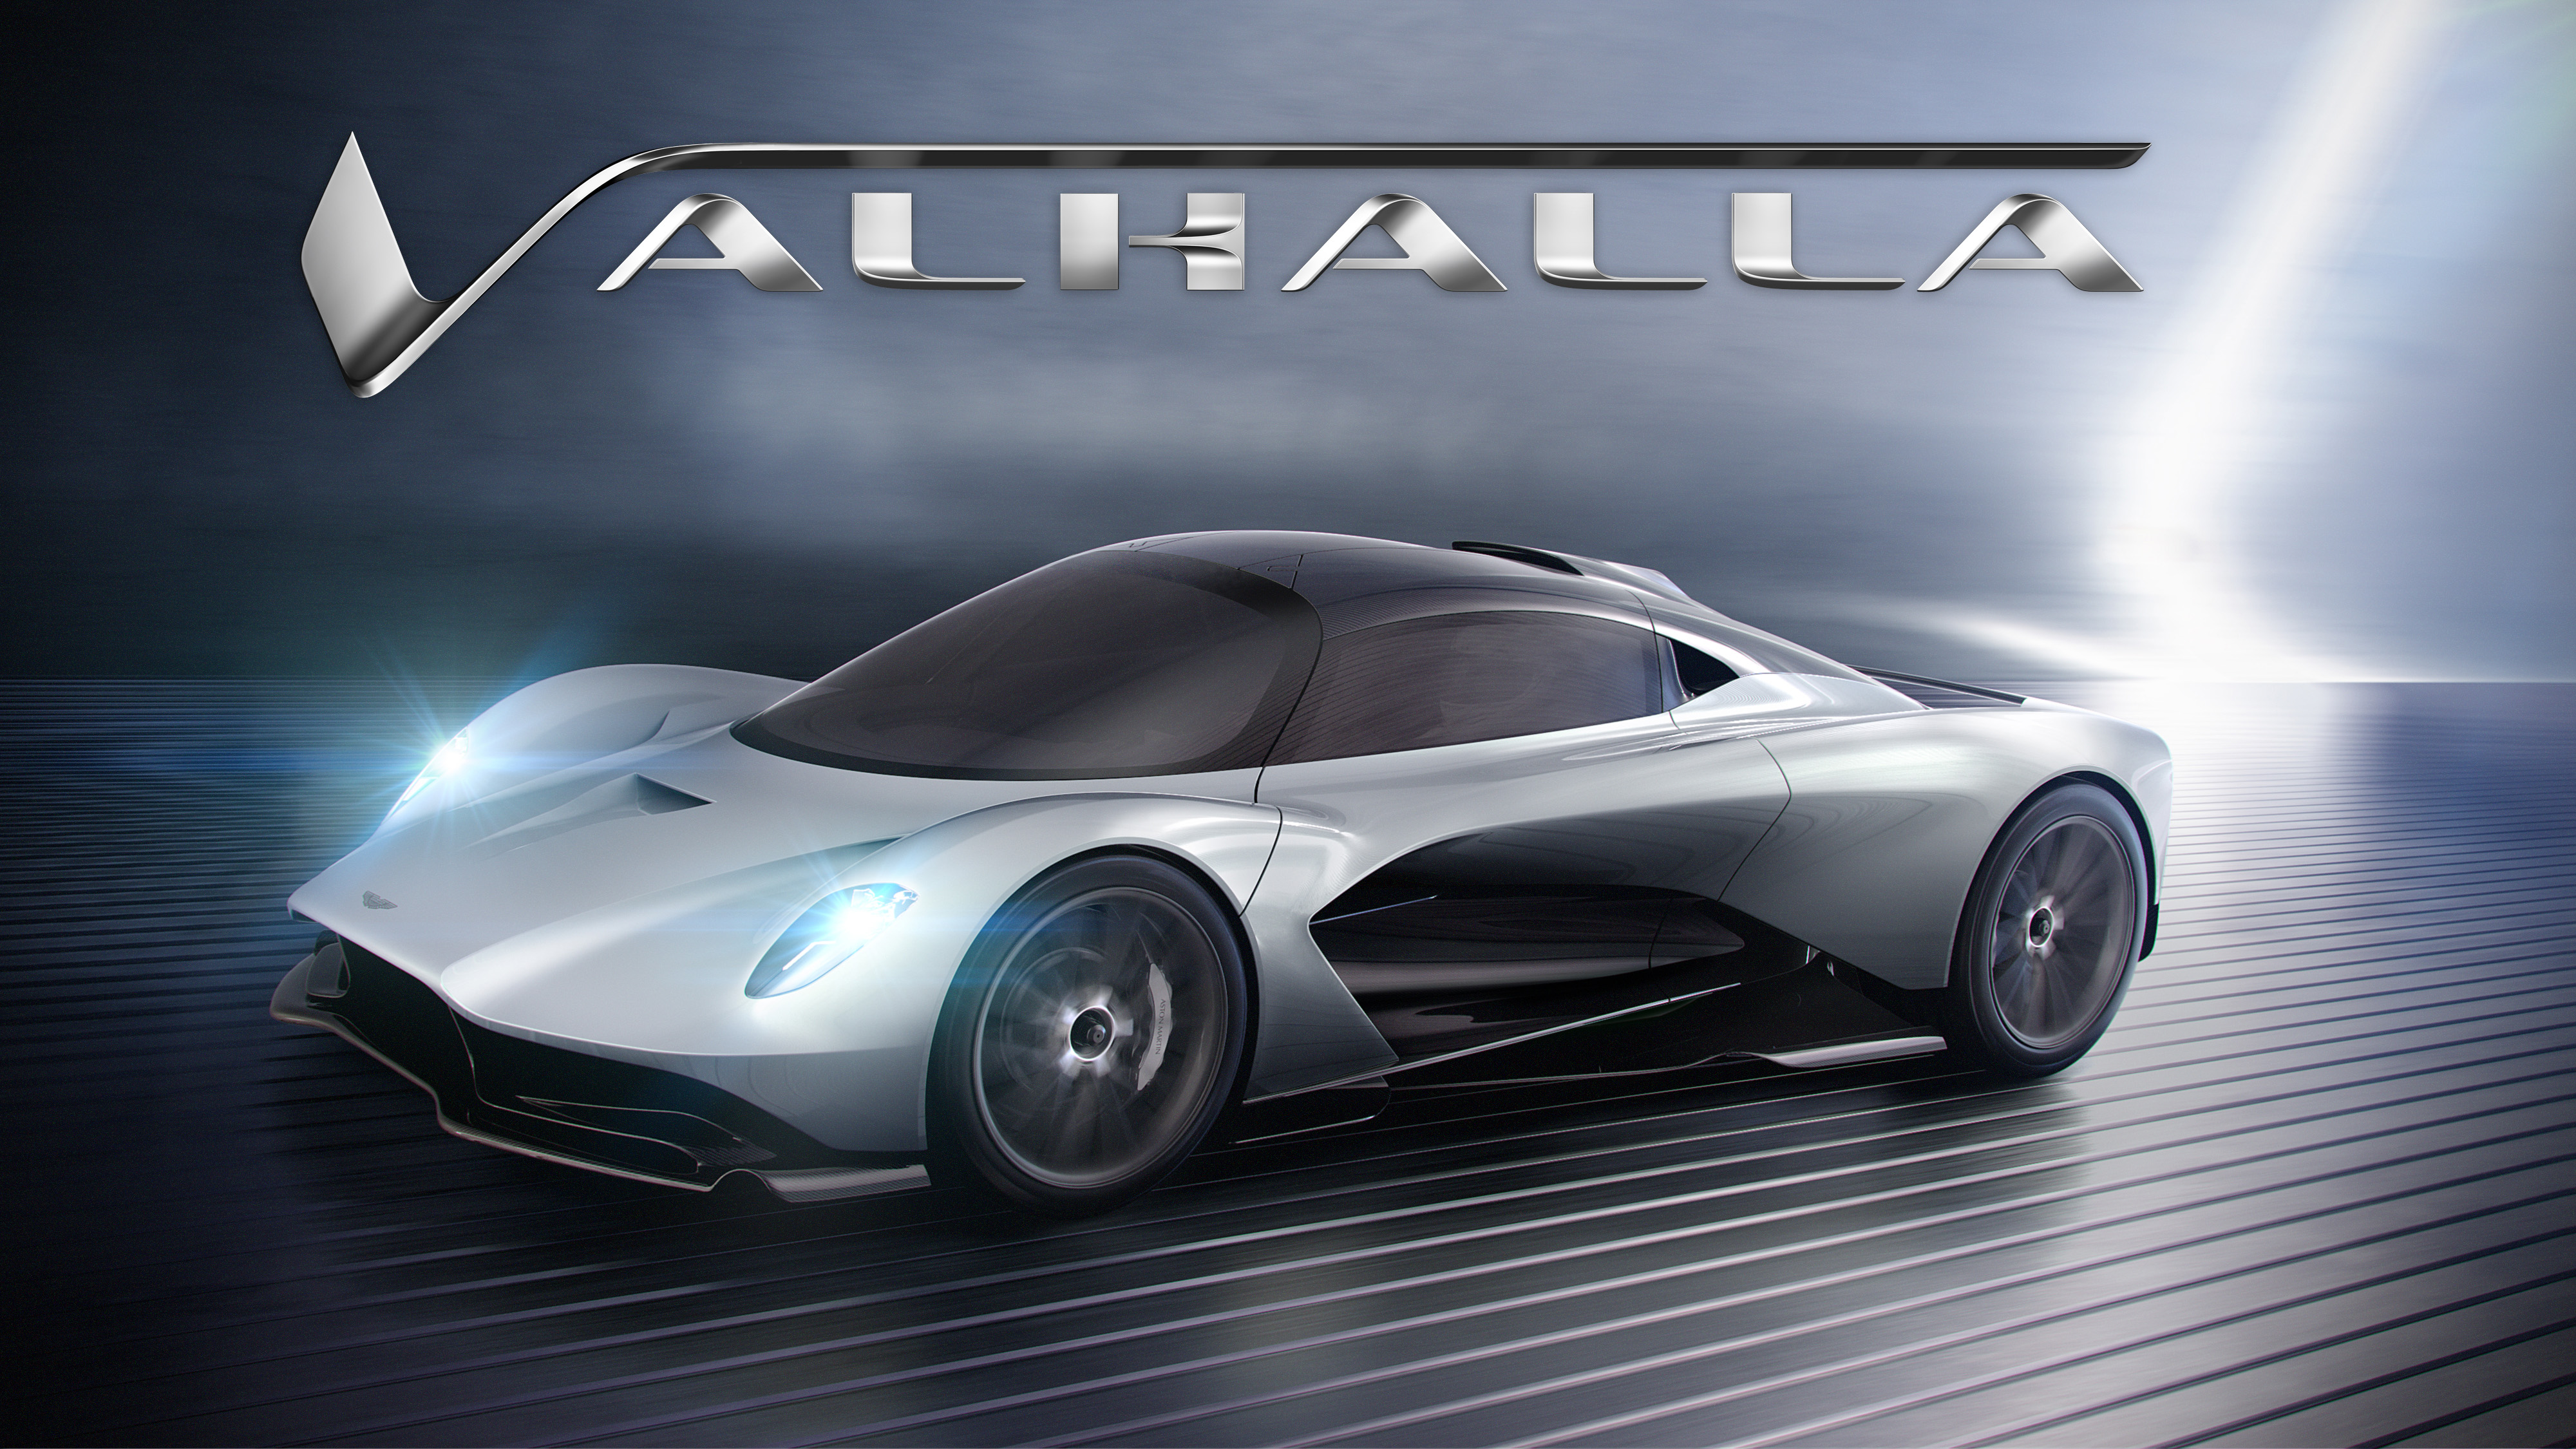 The Aston Martin Valkyrie's baby brother is called 'Valhalla'